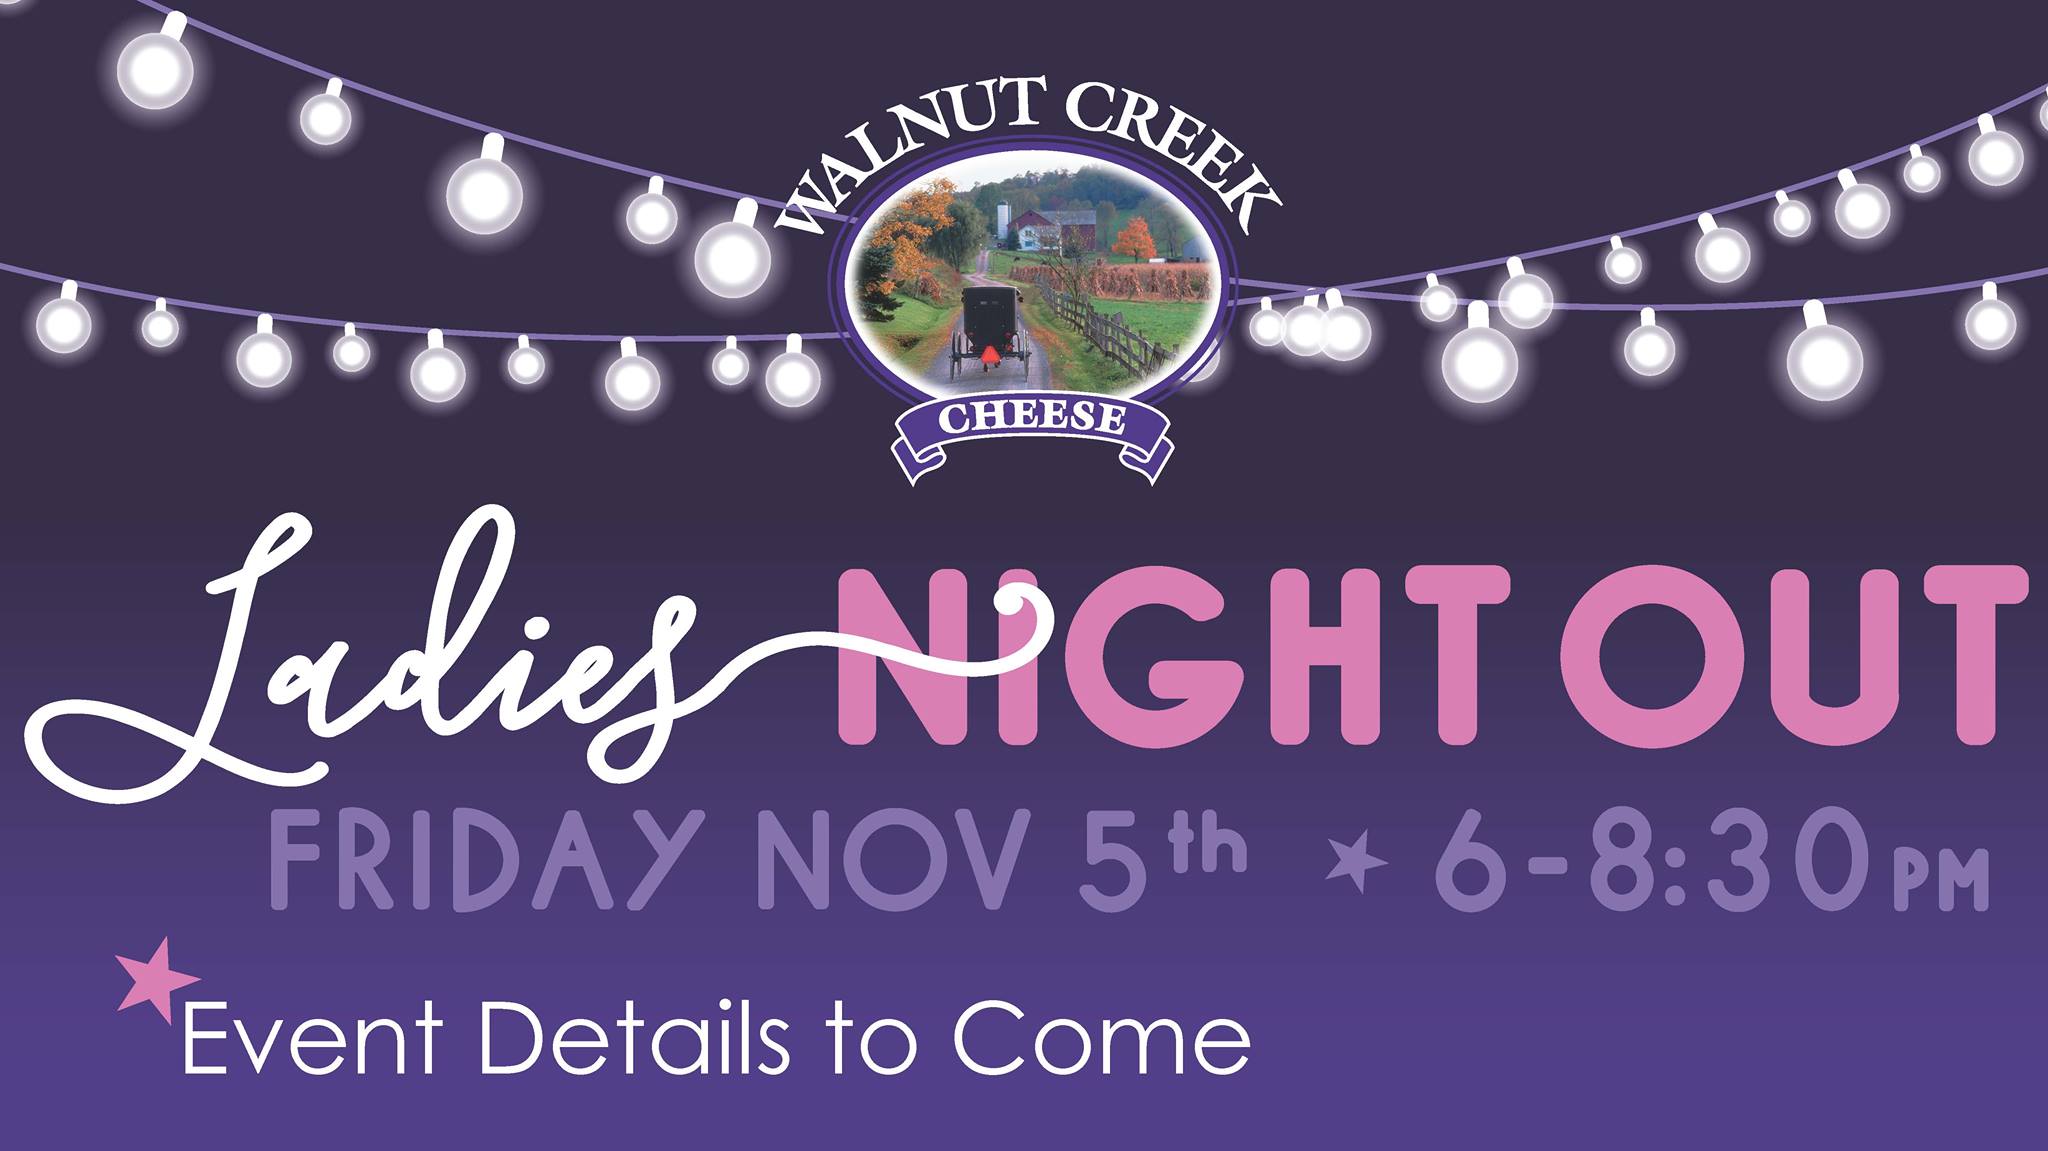 Walnut Creek Cheese Ladies Night Out